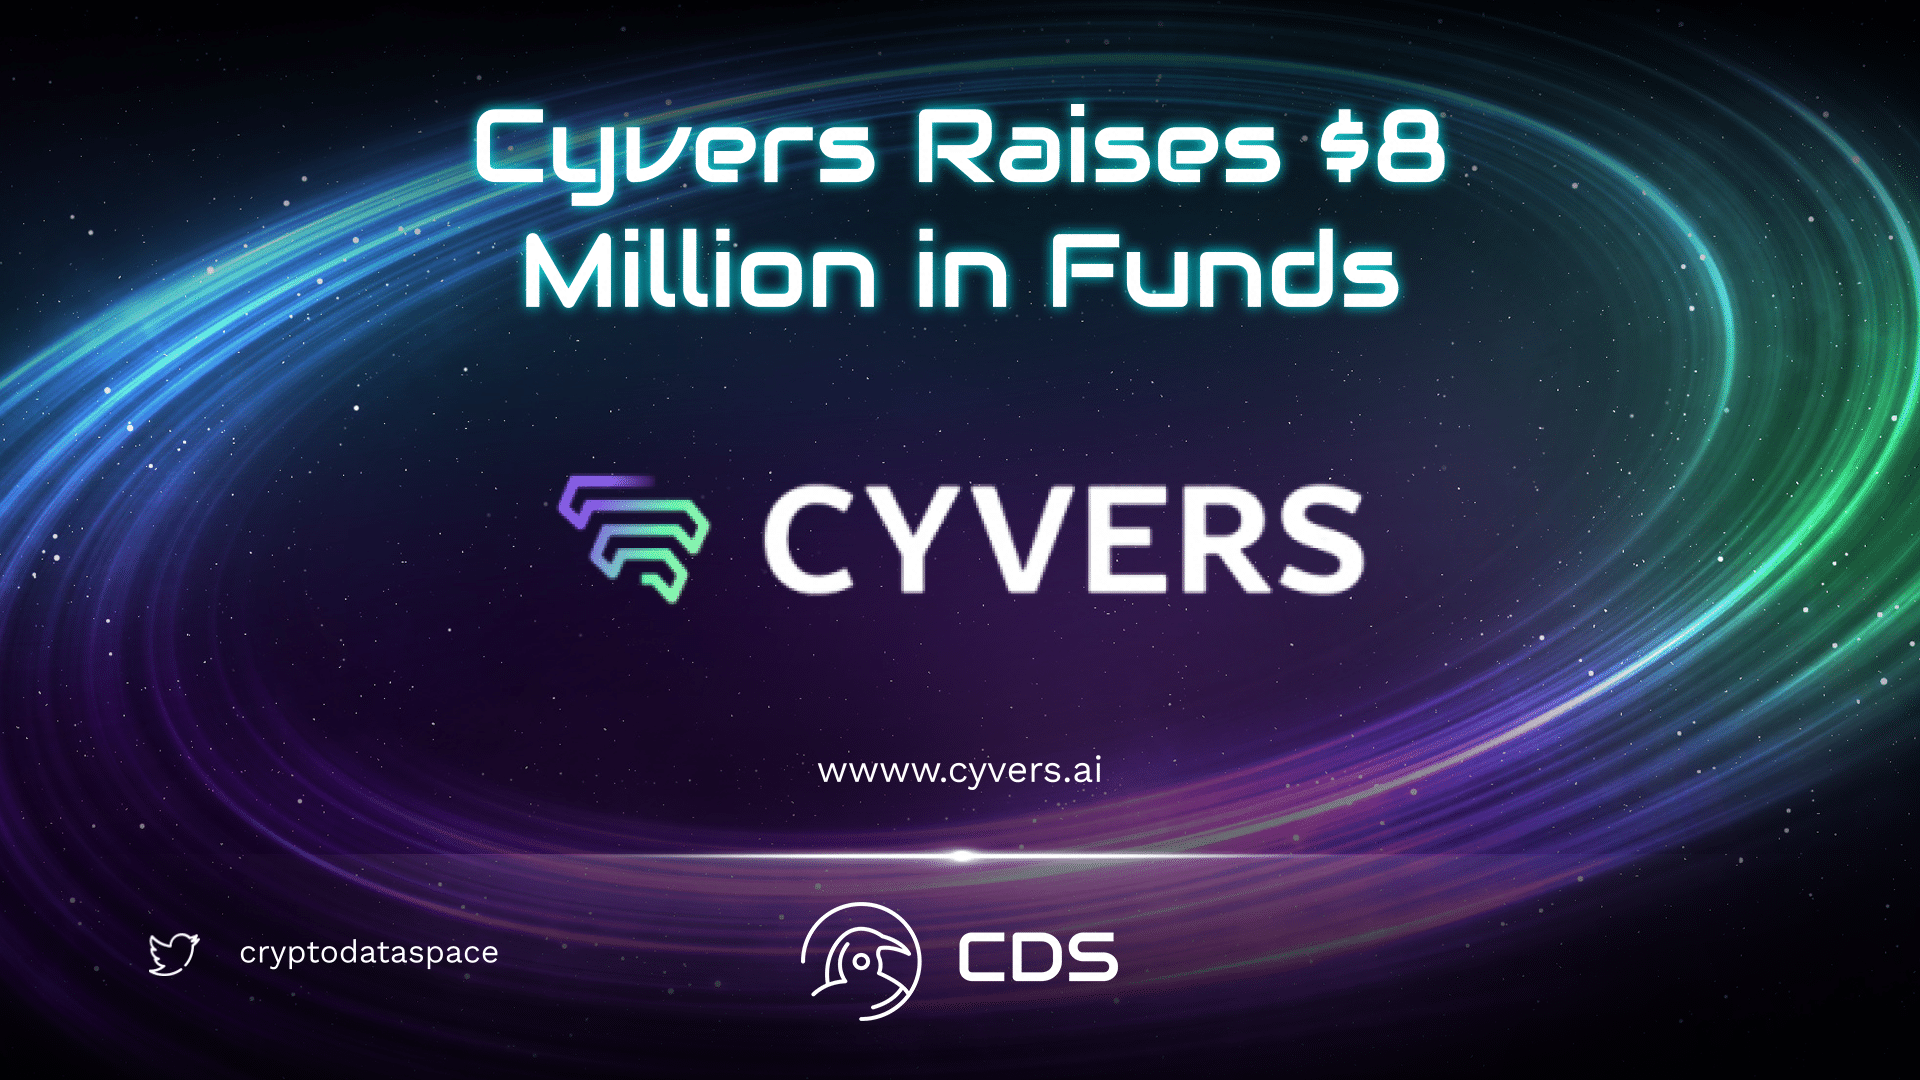 Cyvers Raises $8 Million in Funds